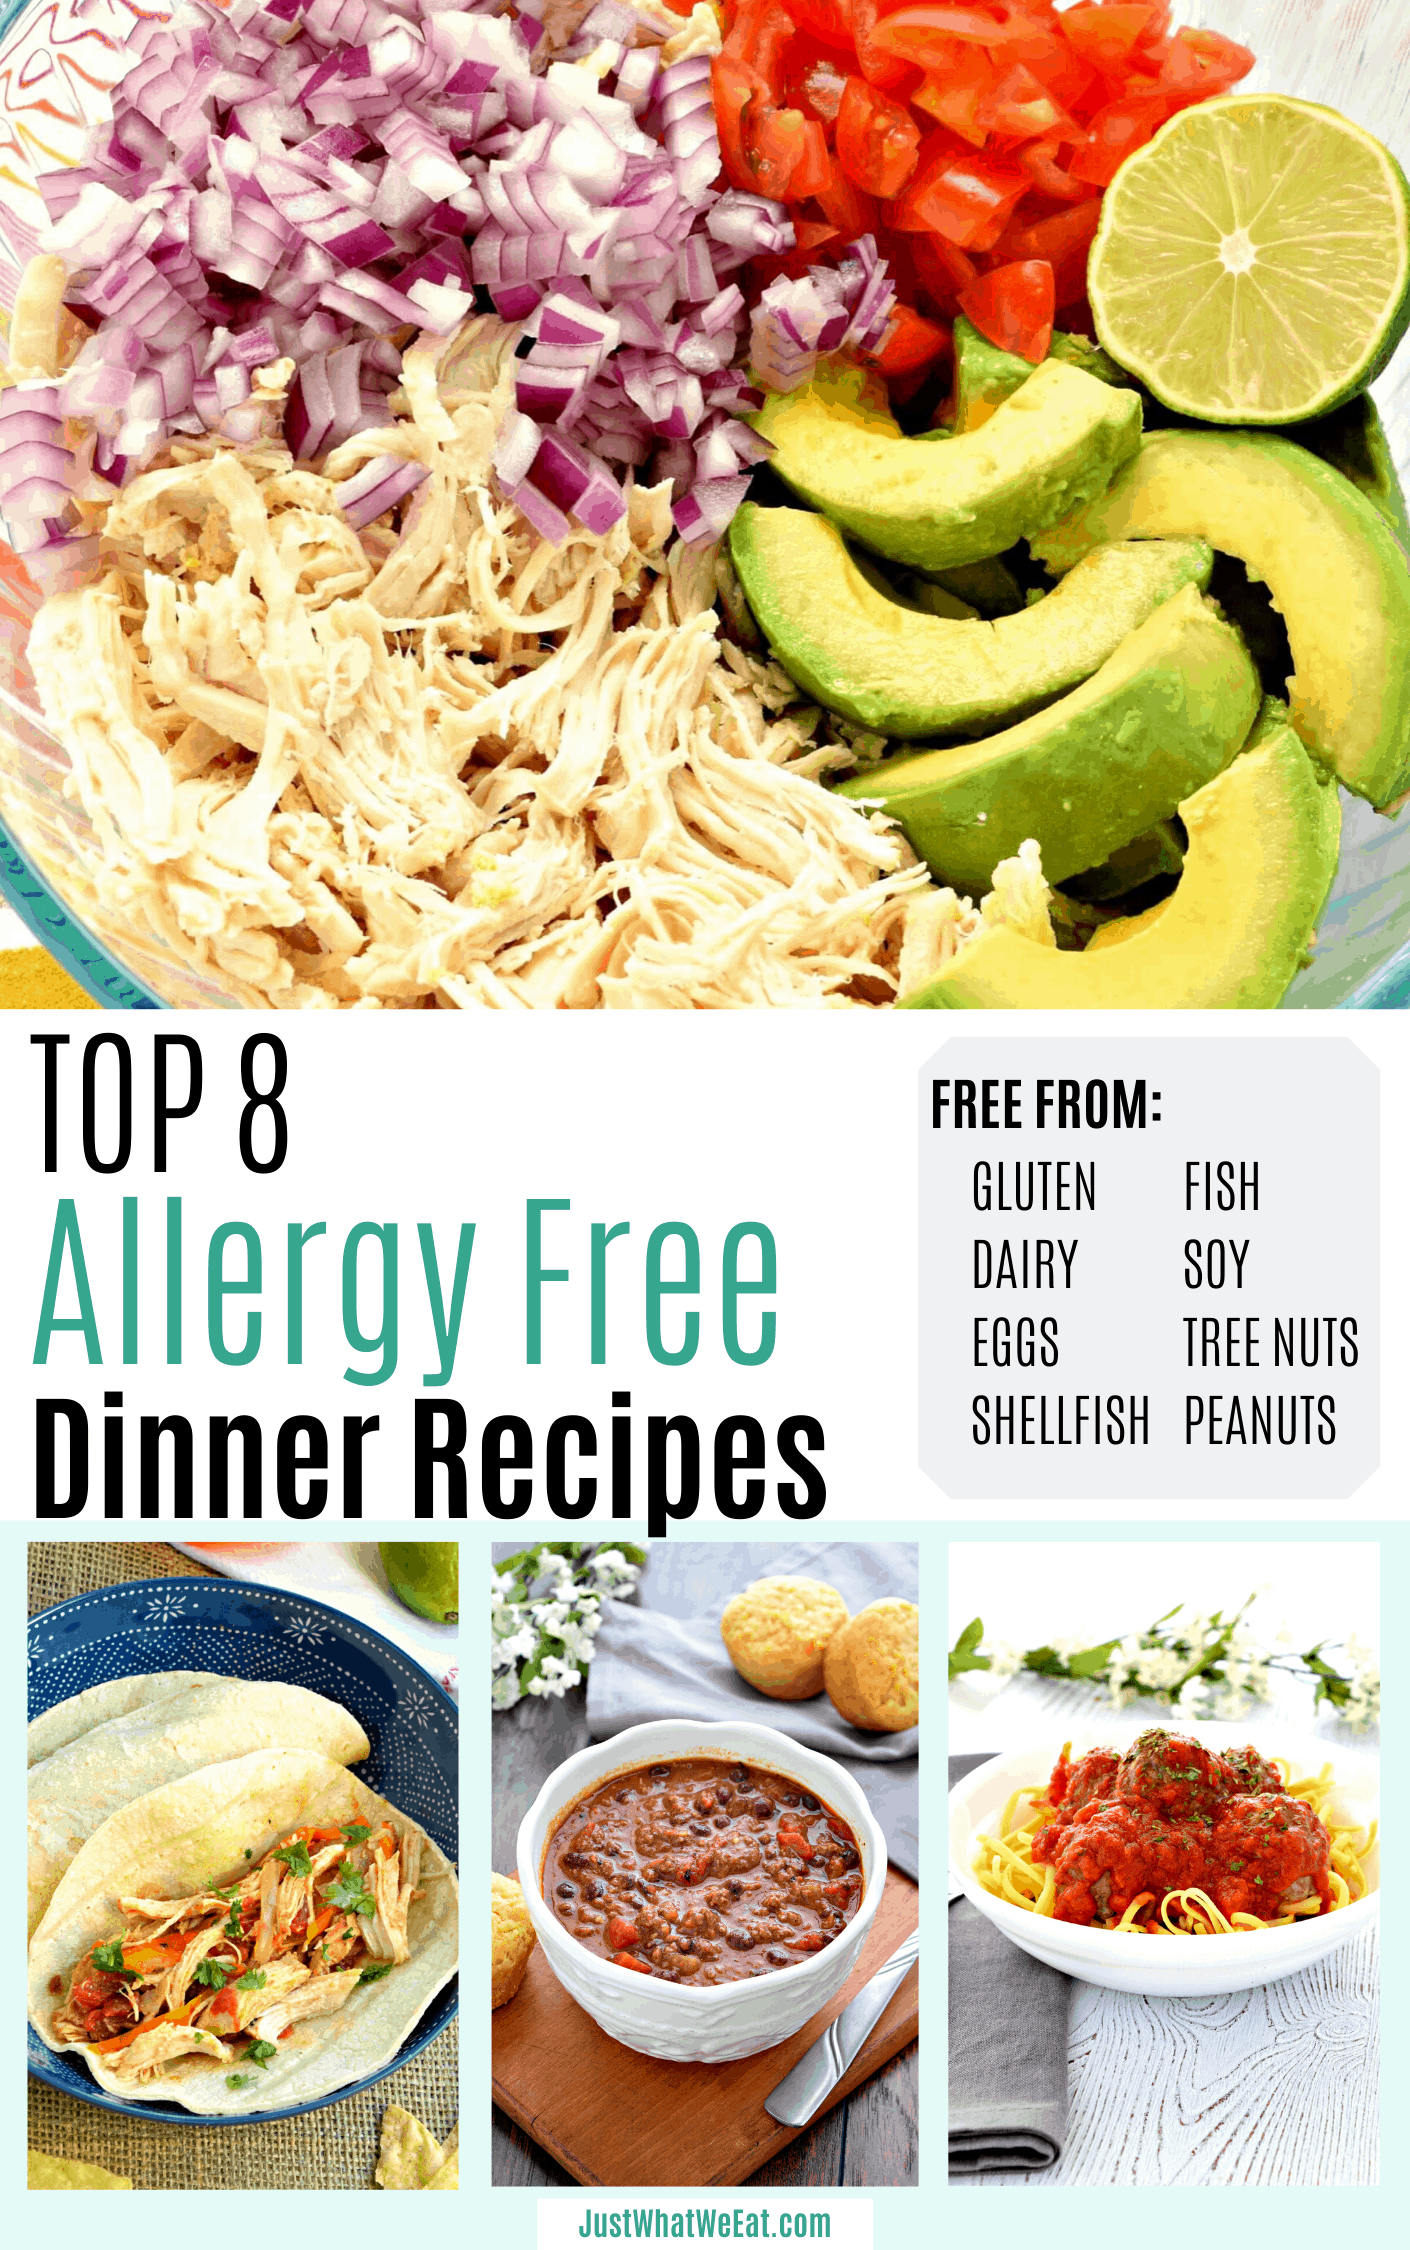 Allergen-free recipes: What to eat for food allergies